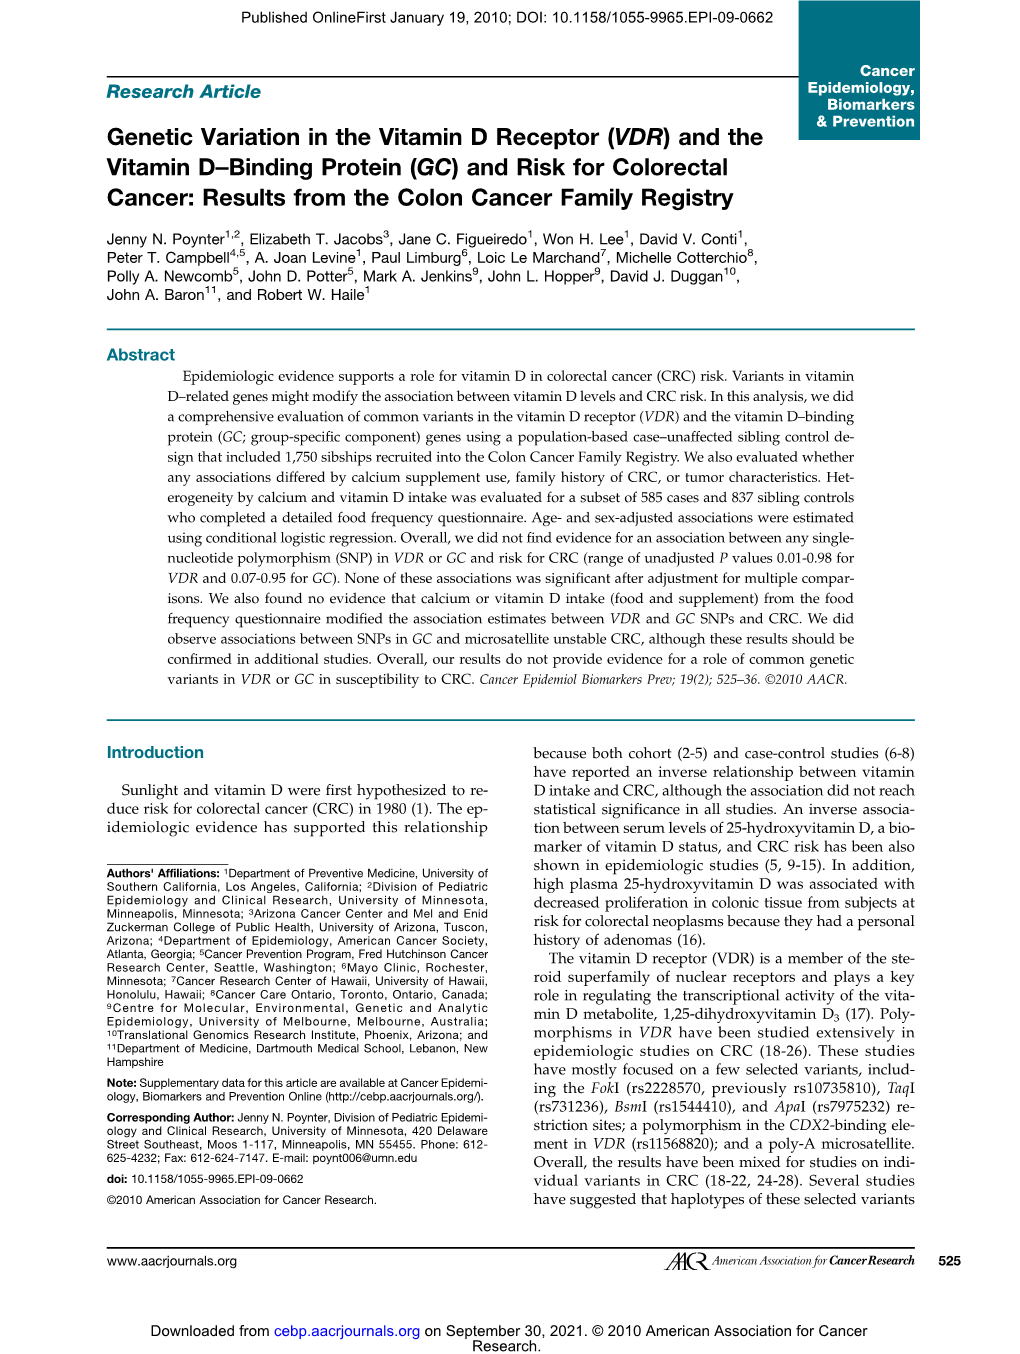 Genetic Variation in the Vitamin D Receptor (VDR) and the Vitamin D–Binding Protein (GC) and Risk for Colorectal Cancer: Results from the Colon Cancer Family Registry